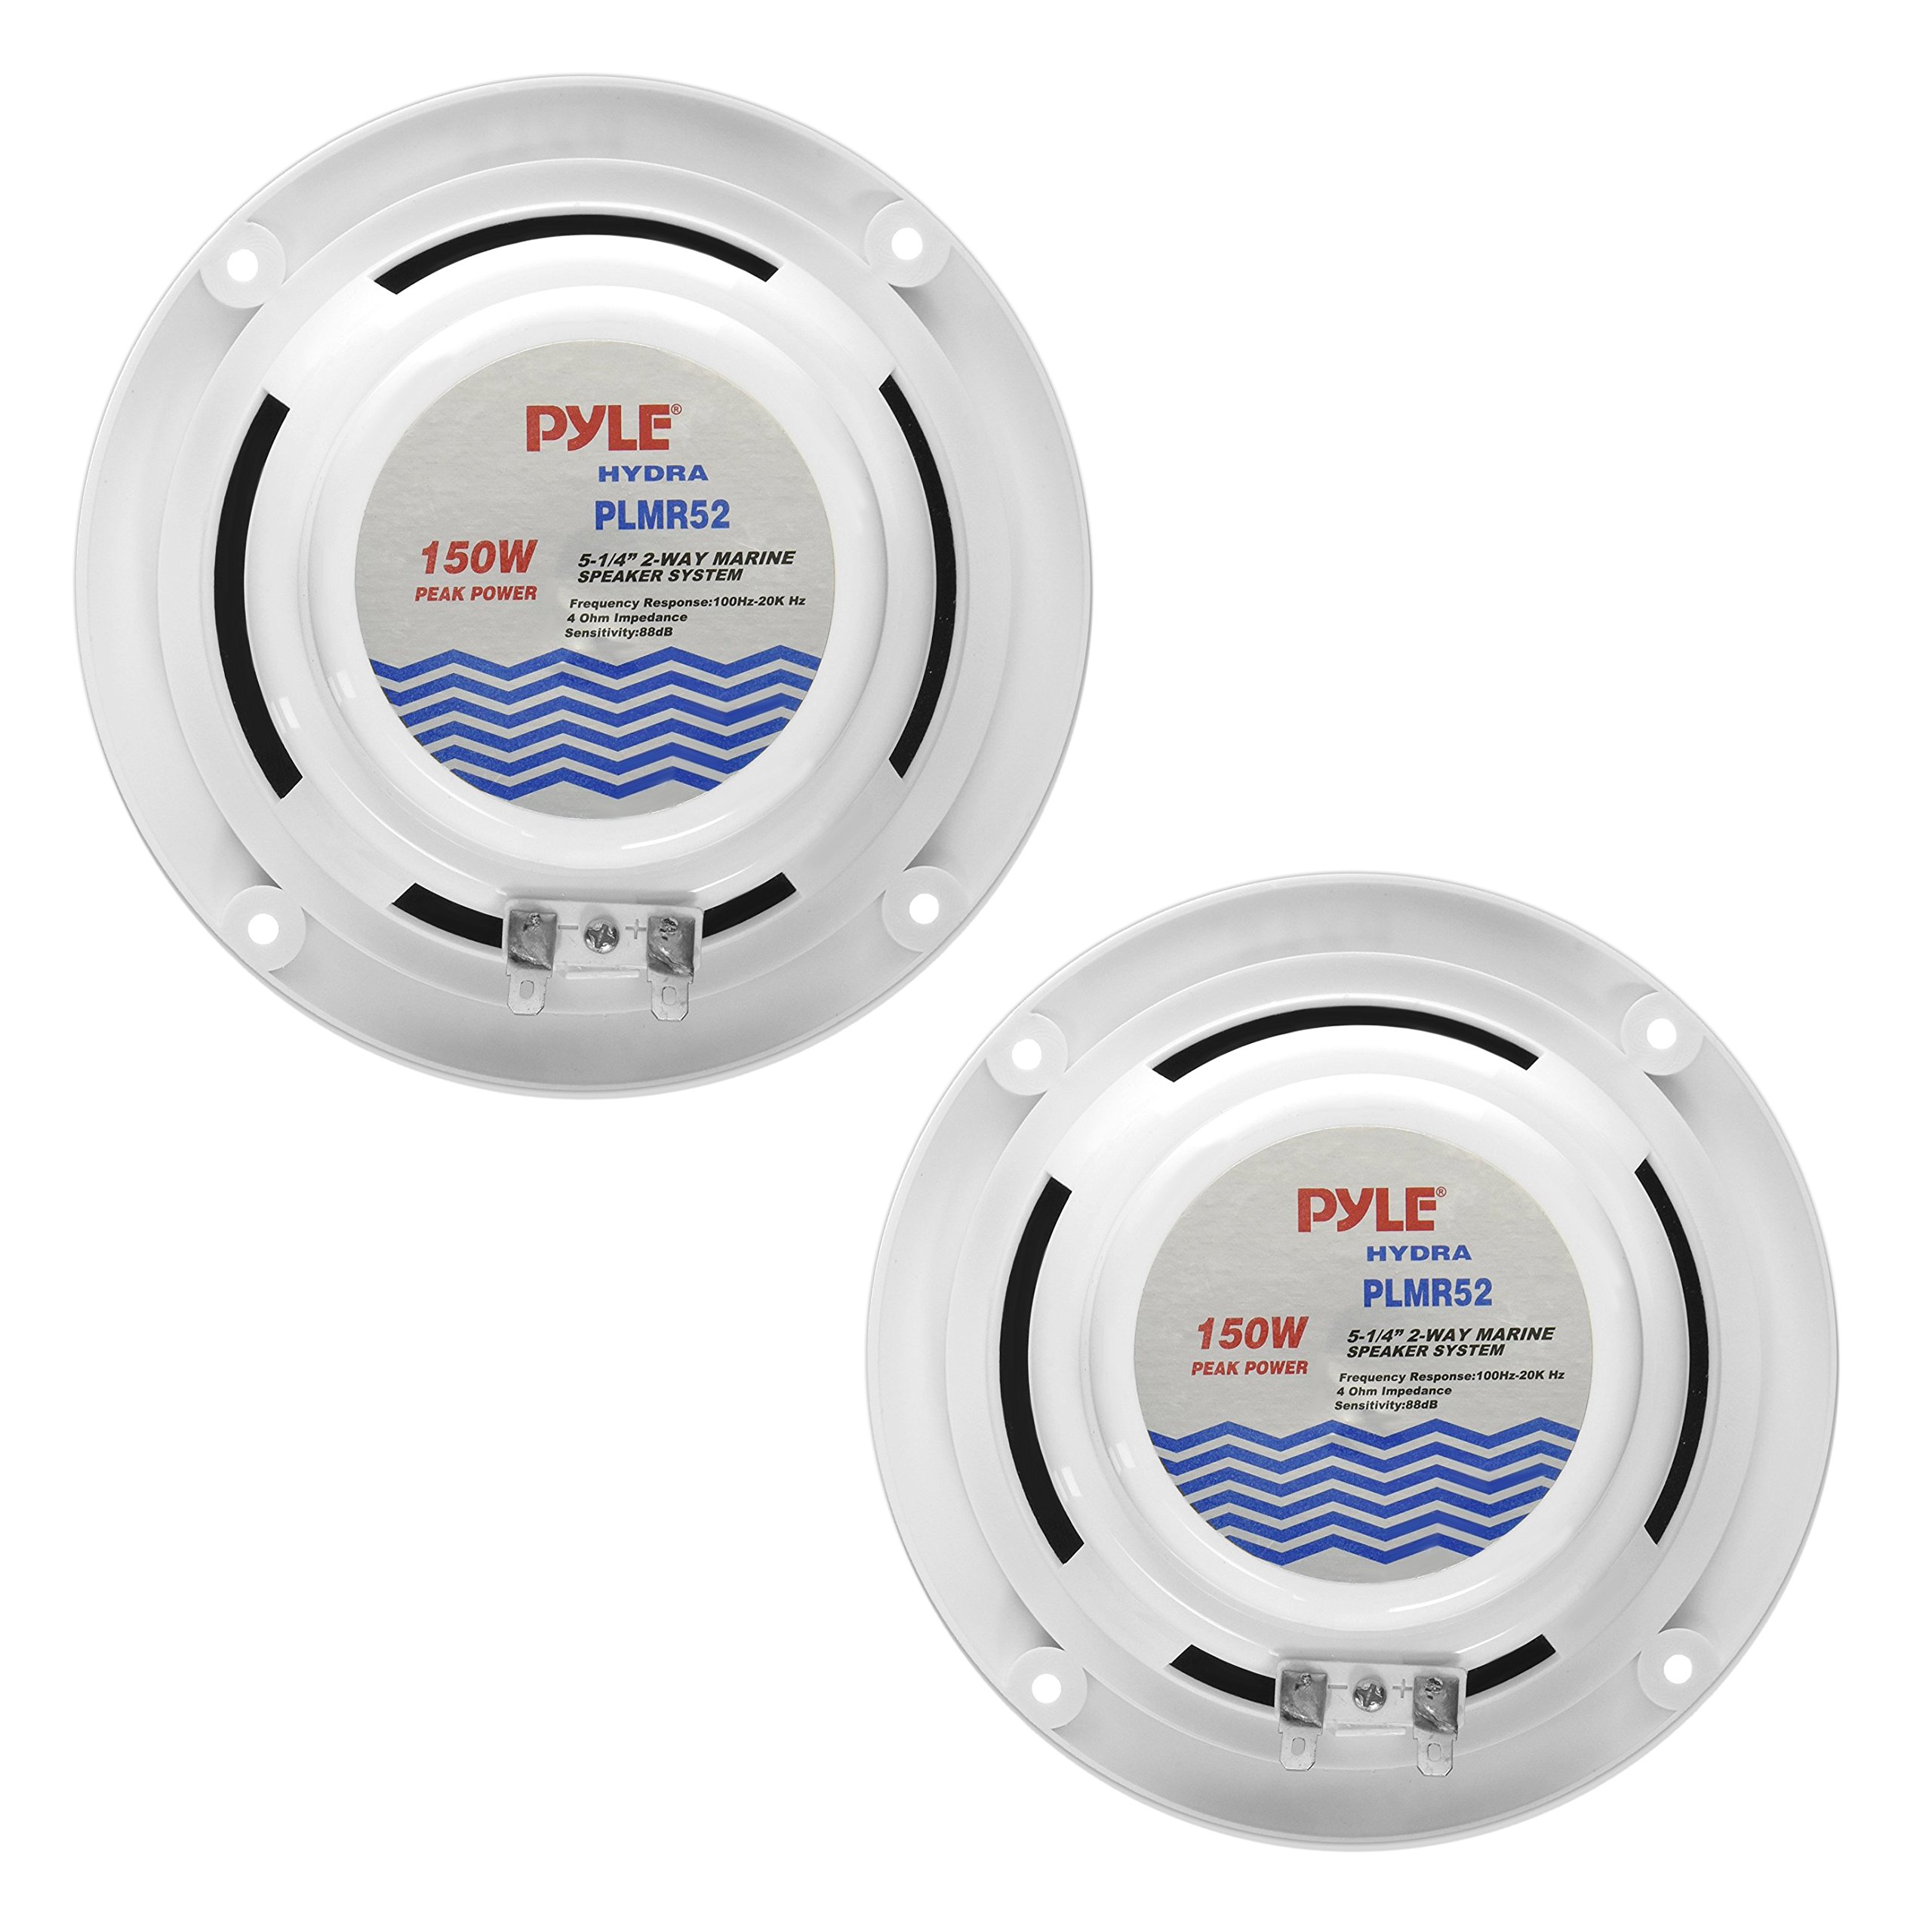 Pyle 5.25 Inch Dual Marine Speakers - 2 Way Waterproof&Weather Resistant Outdoor Audio Stereo Sound System with 150 Watt Power, Cloth Surround and Low Profile Design - 1 Pair - PLMR52, Black/White